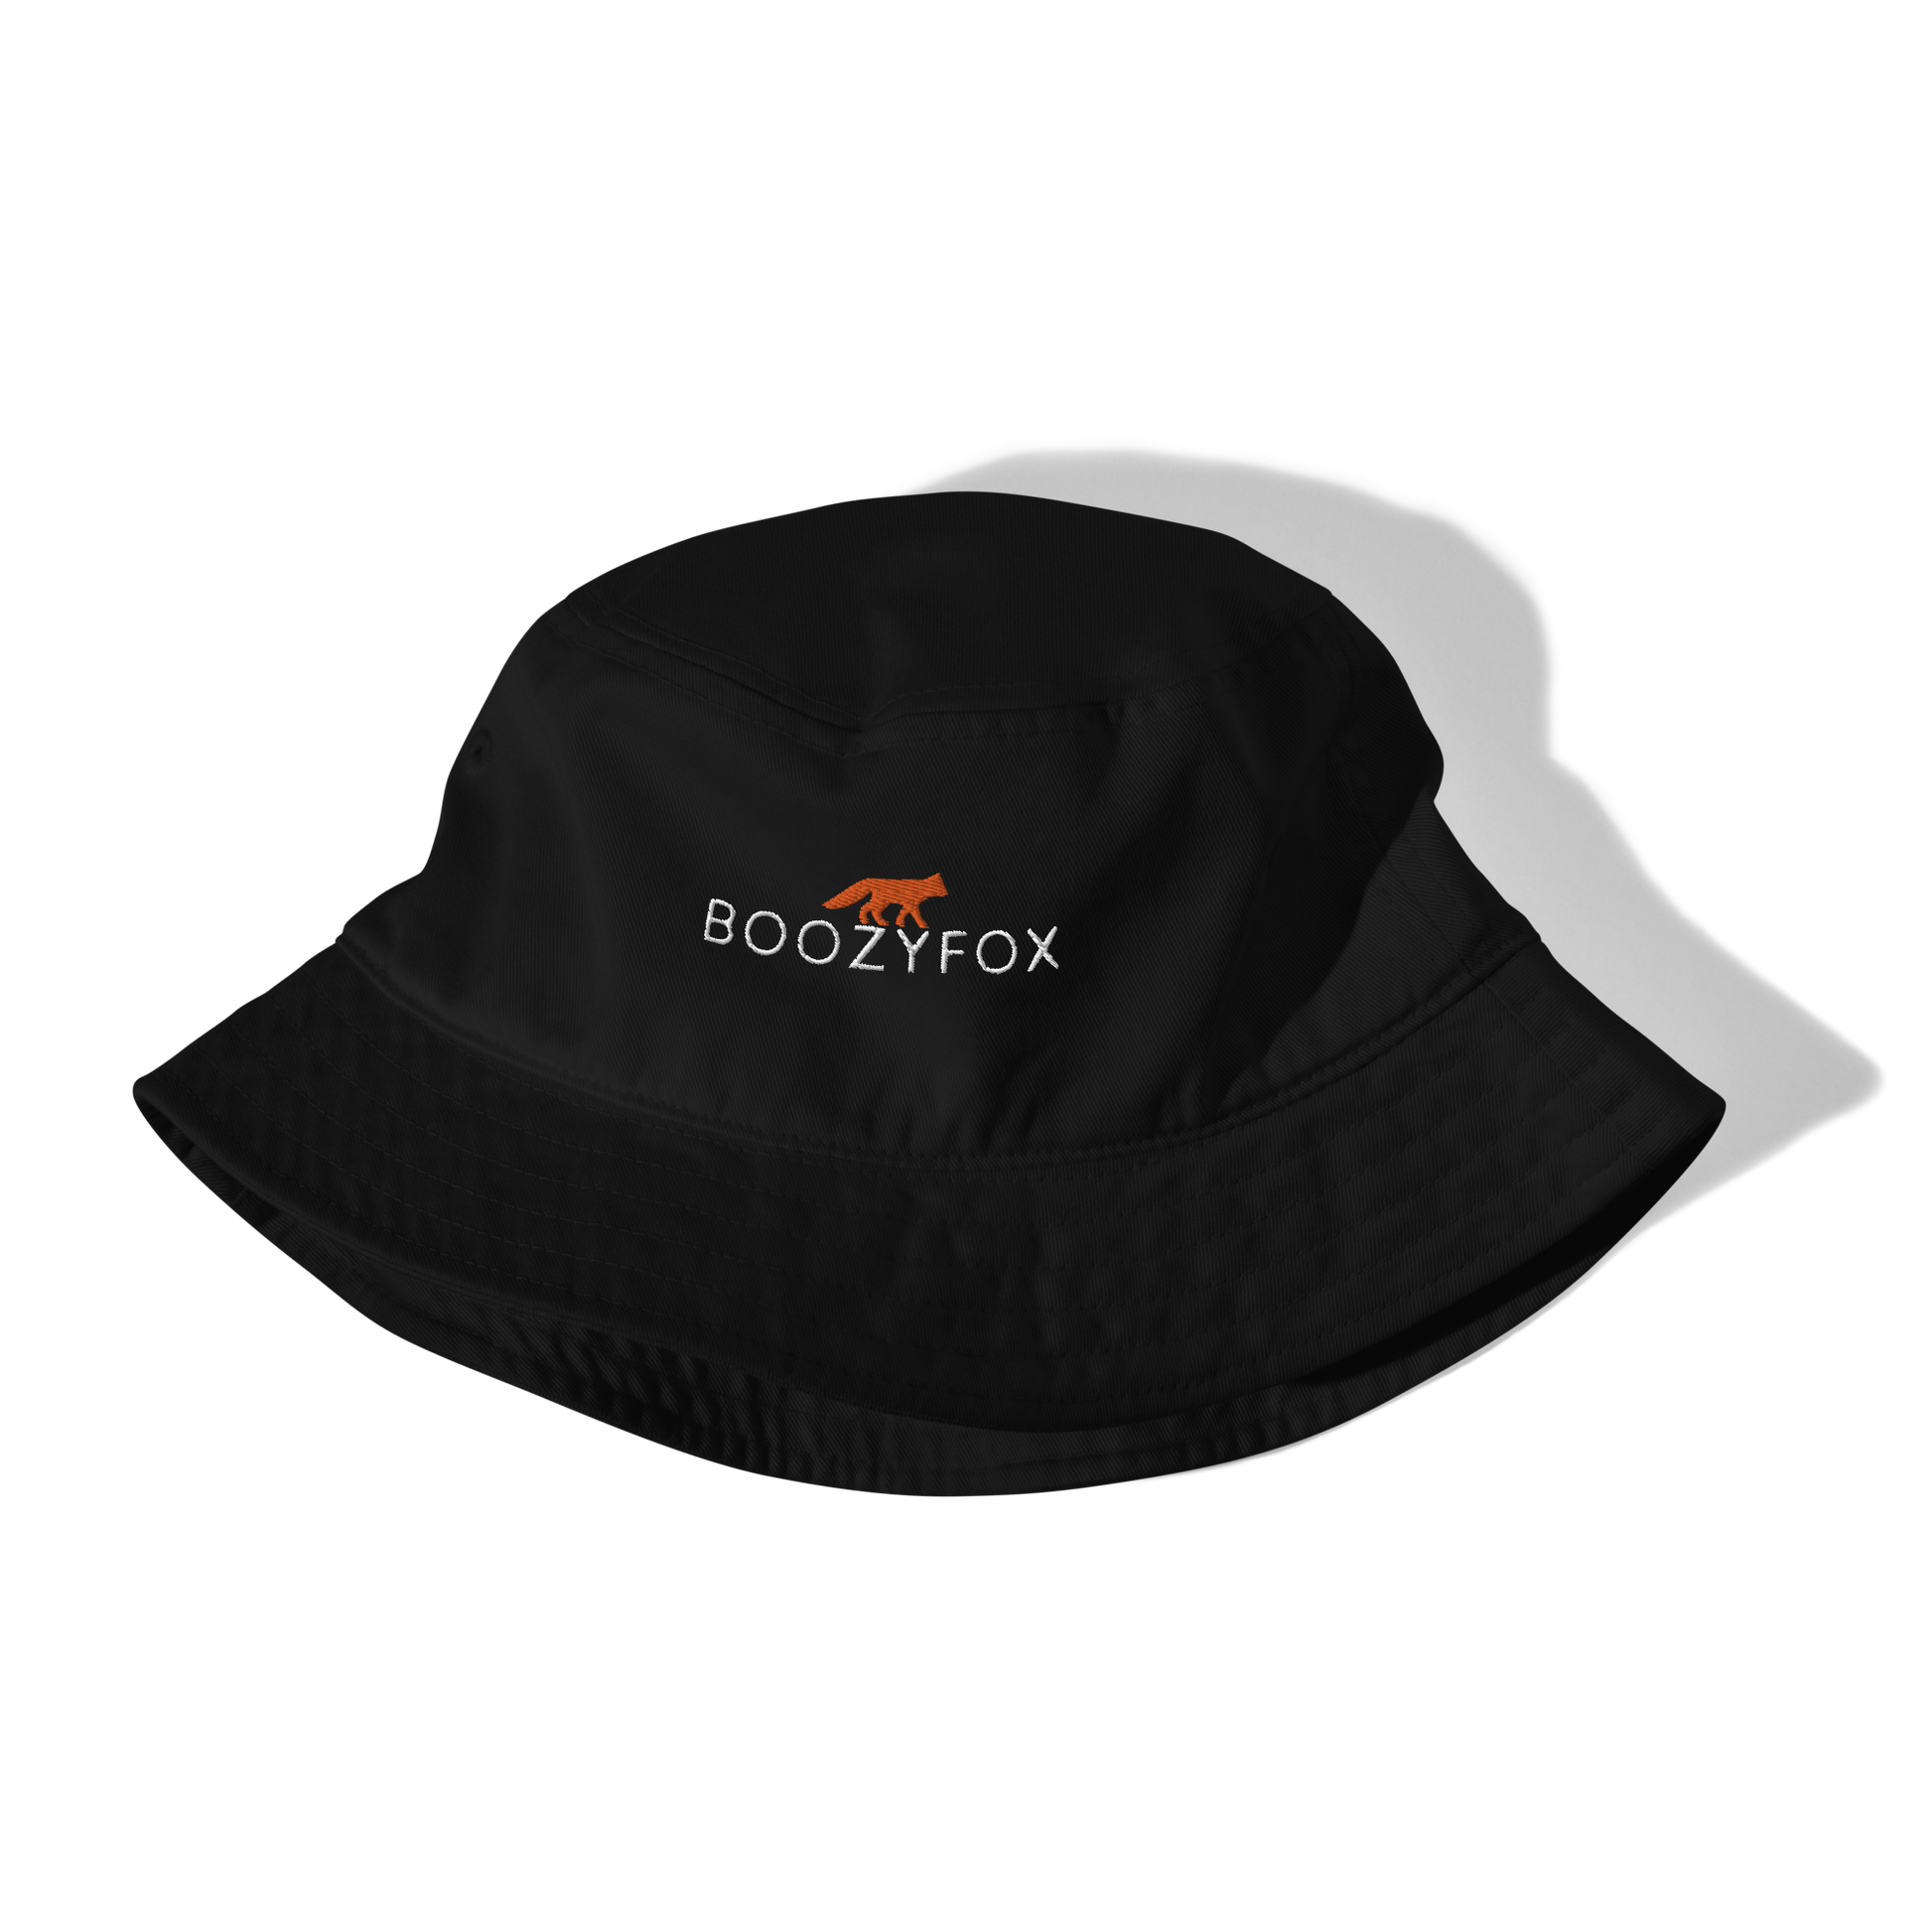 Front details of a Black Organic Bucket Hat featuring a recognizable Boozy Fox embroidery logo on the front - Bucket Hats - Boozy Fox